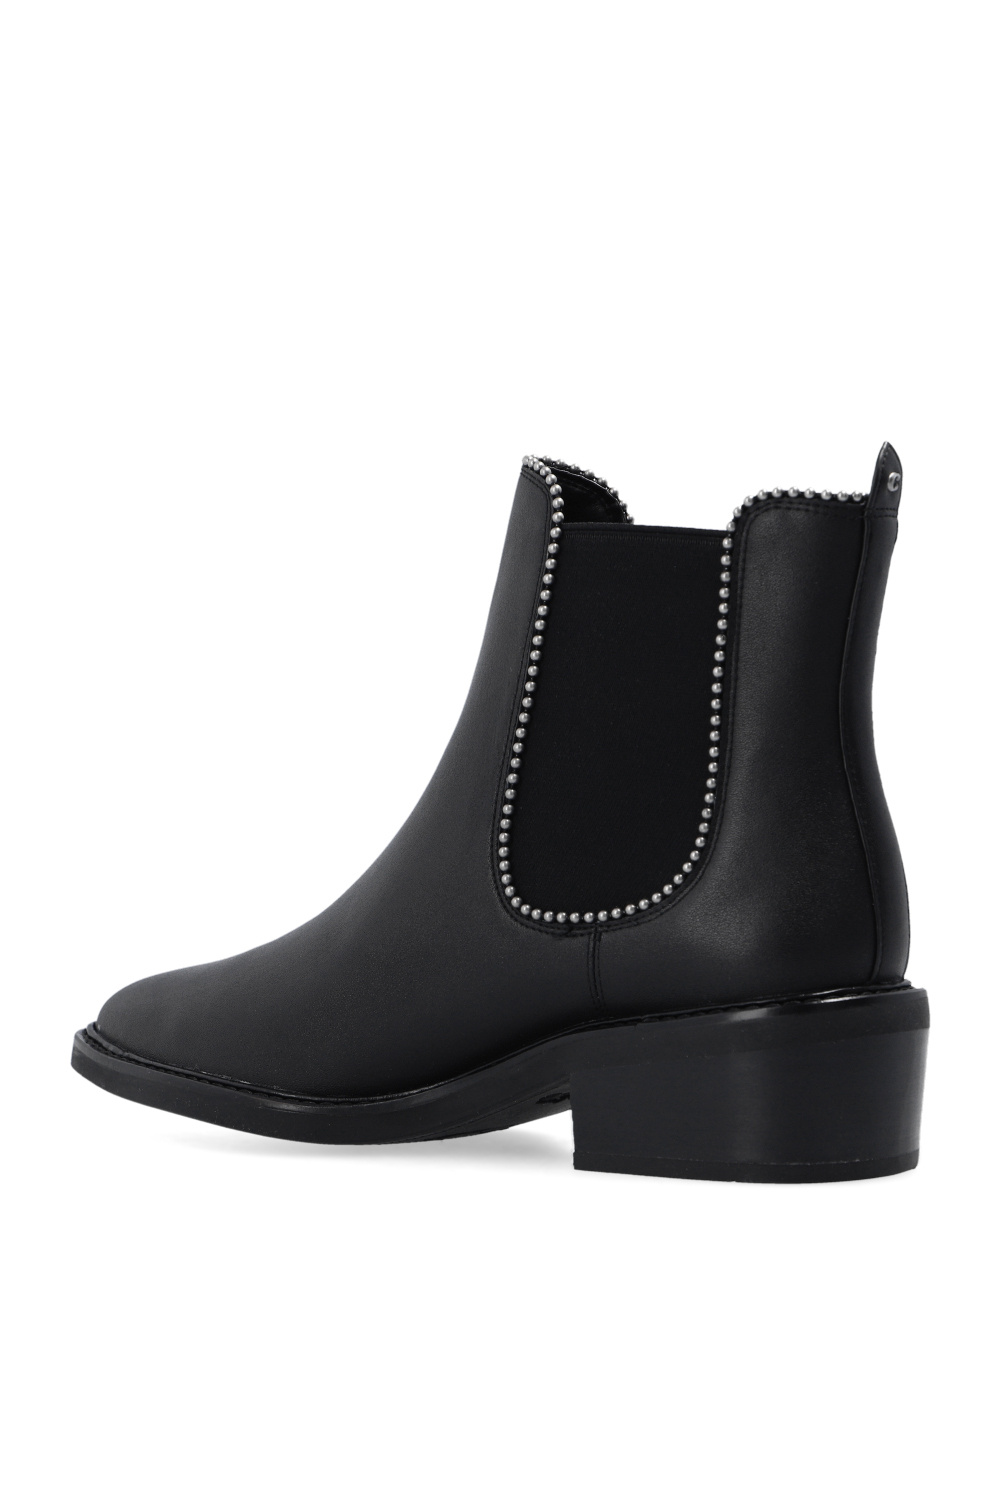 Coach ‘Bowery’ Chelsea boots